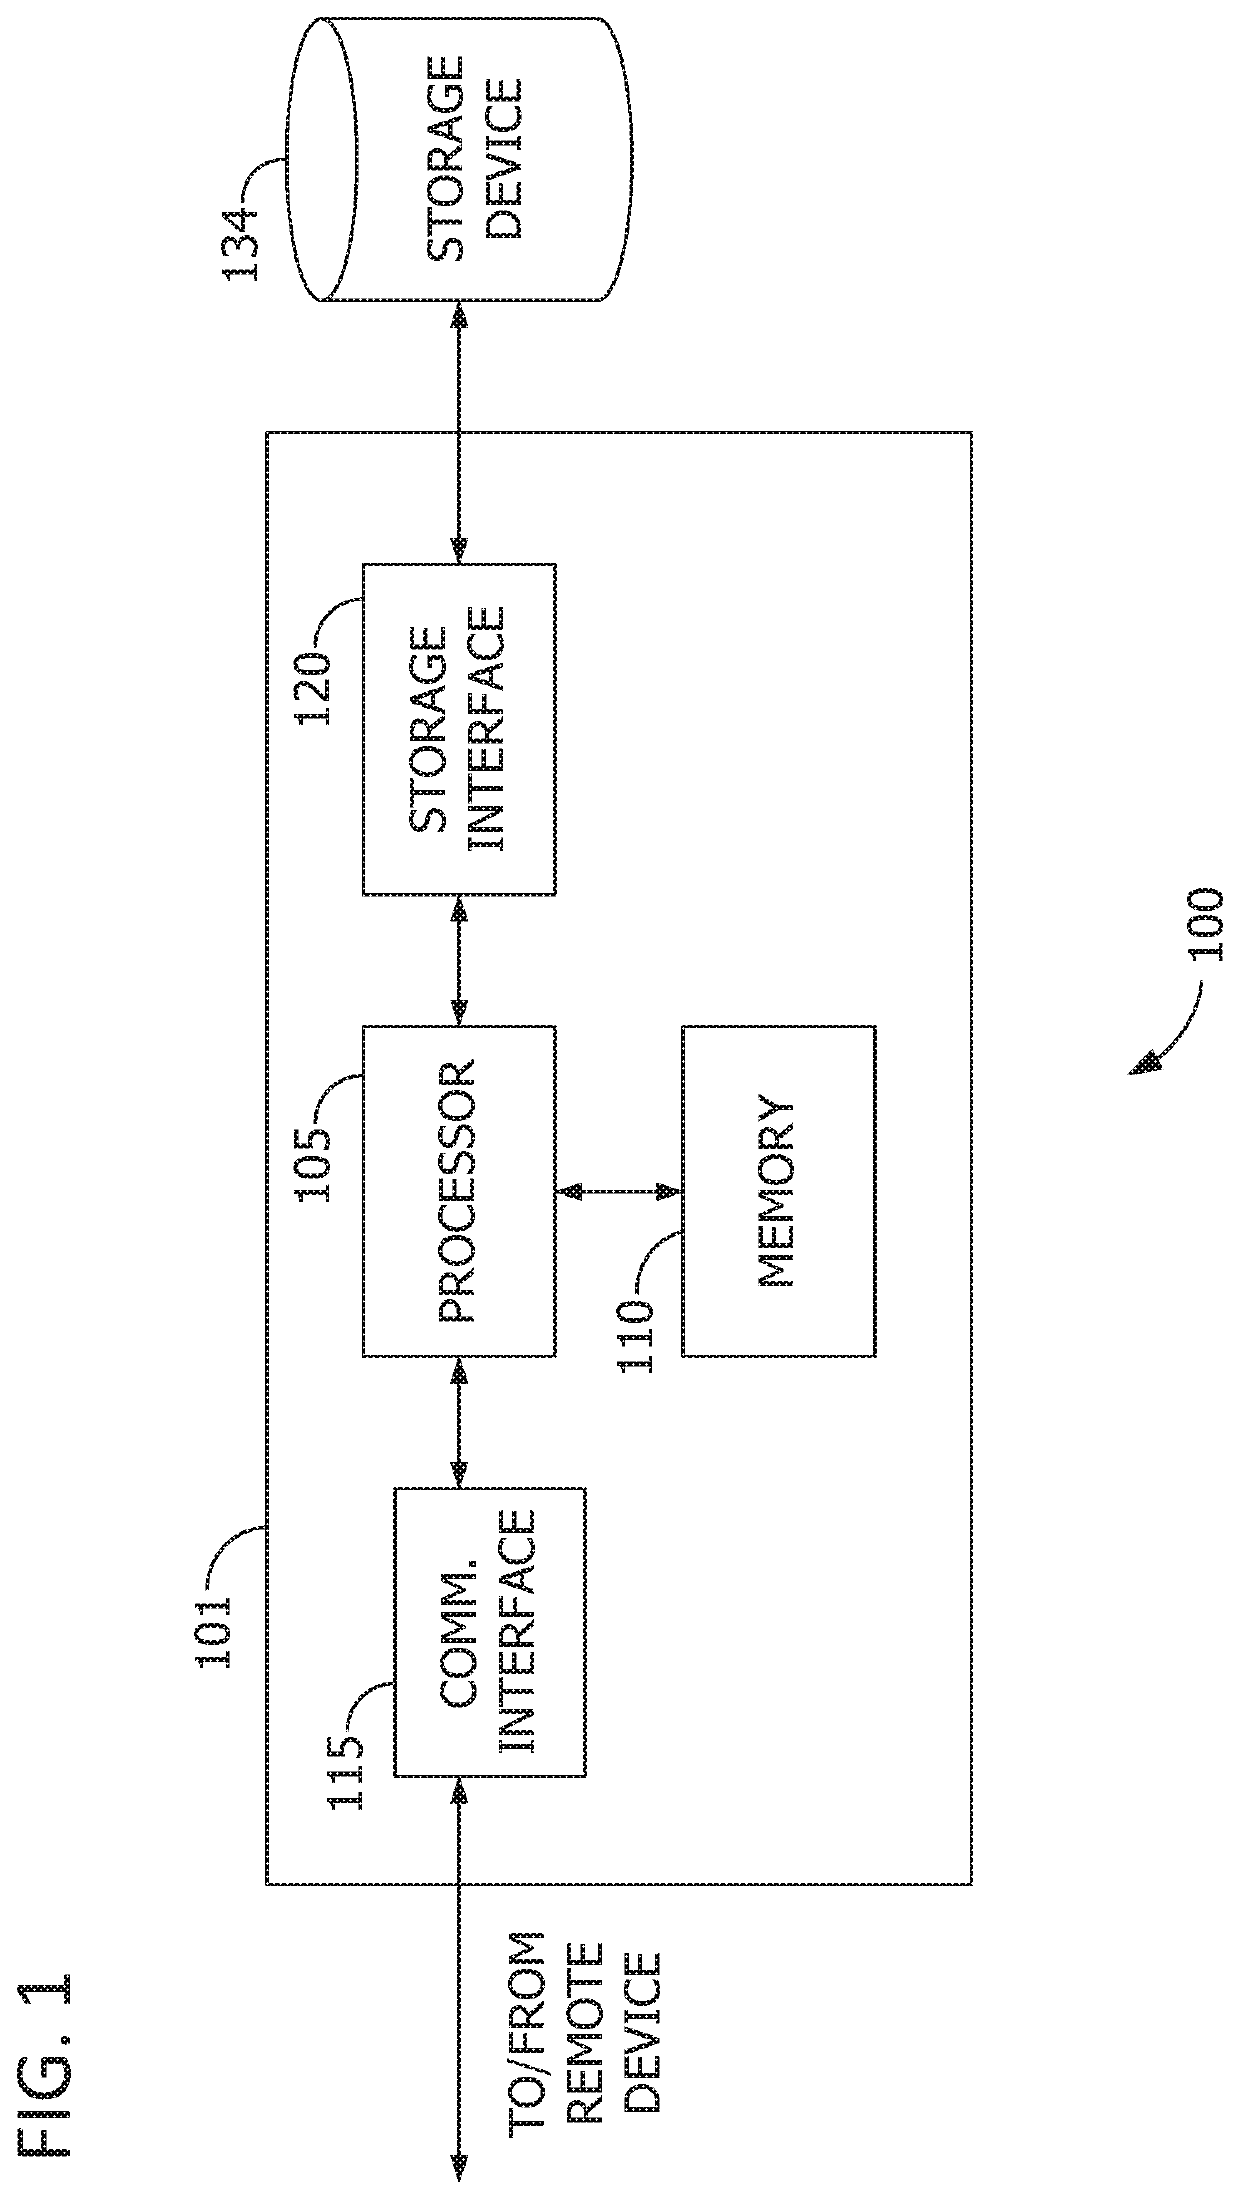 Systems and methods for customizable regular expression generation